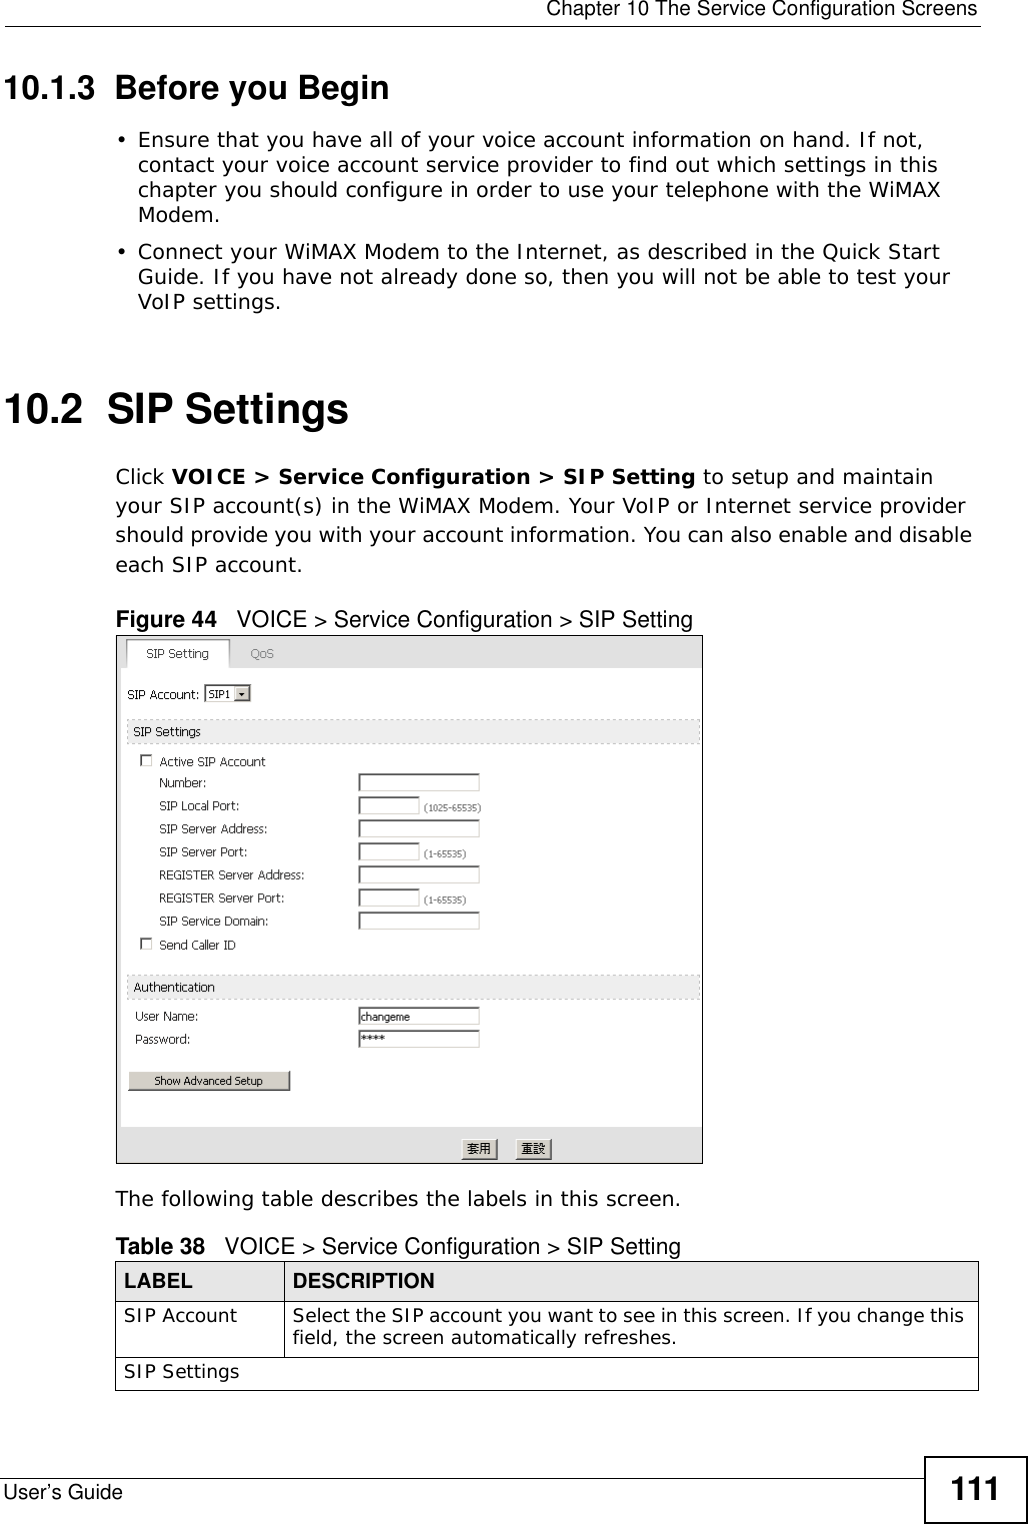  Chapter 10 The Service Configuration ScreensUser’s Guide 11110.1.3  Before you Begin• Ensure that you have all of your voice account information on hand. If not, contact your voice account service provider to find out which settings in this chapter you should configure in order to use your telephone with the WiMAX Modem.• Connect your WiMAX Modem to the Internet, as described in the Quick Start Guide. If you have not already done so, then you will not be able to test your VoIP settings.10.2  SIP SettingsClick VOICE &gt; Service Configuration &gt; SIP Setting to setup and maintain your SIP account(s) in the WiMAX Modem. Your VoIP or Internet service provider should provide you with your account information. You can also enable and disable each SIP account.Figure 44   VOICE &gt; Service Configuration &gt; SIP SettingThe following table describes the labels in this screen.  Table 38   VOICE &gt; Service Configuration &gt; SIP SettingLABEL DESCRIPTIONSIP Account Select the SIP account you want to see in this screen. If you change this field, the screen automatically refreshes.SIP Settings